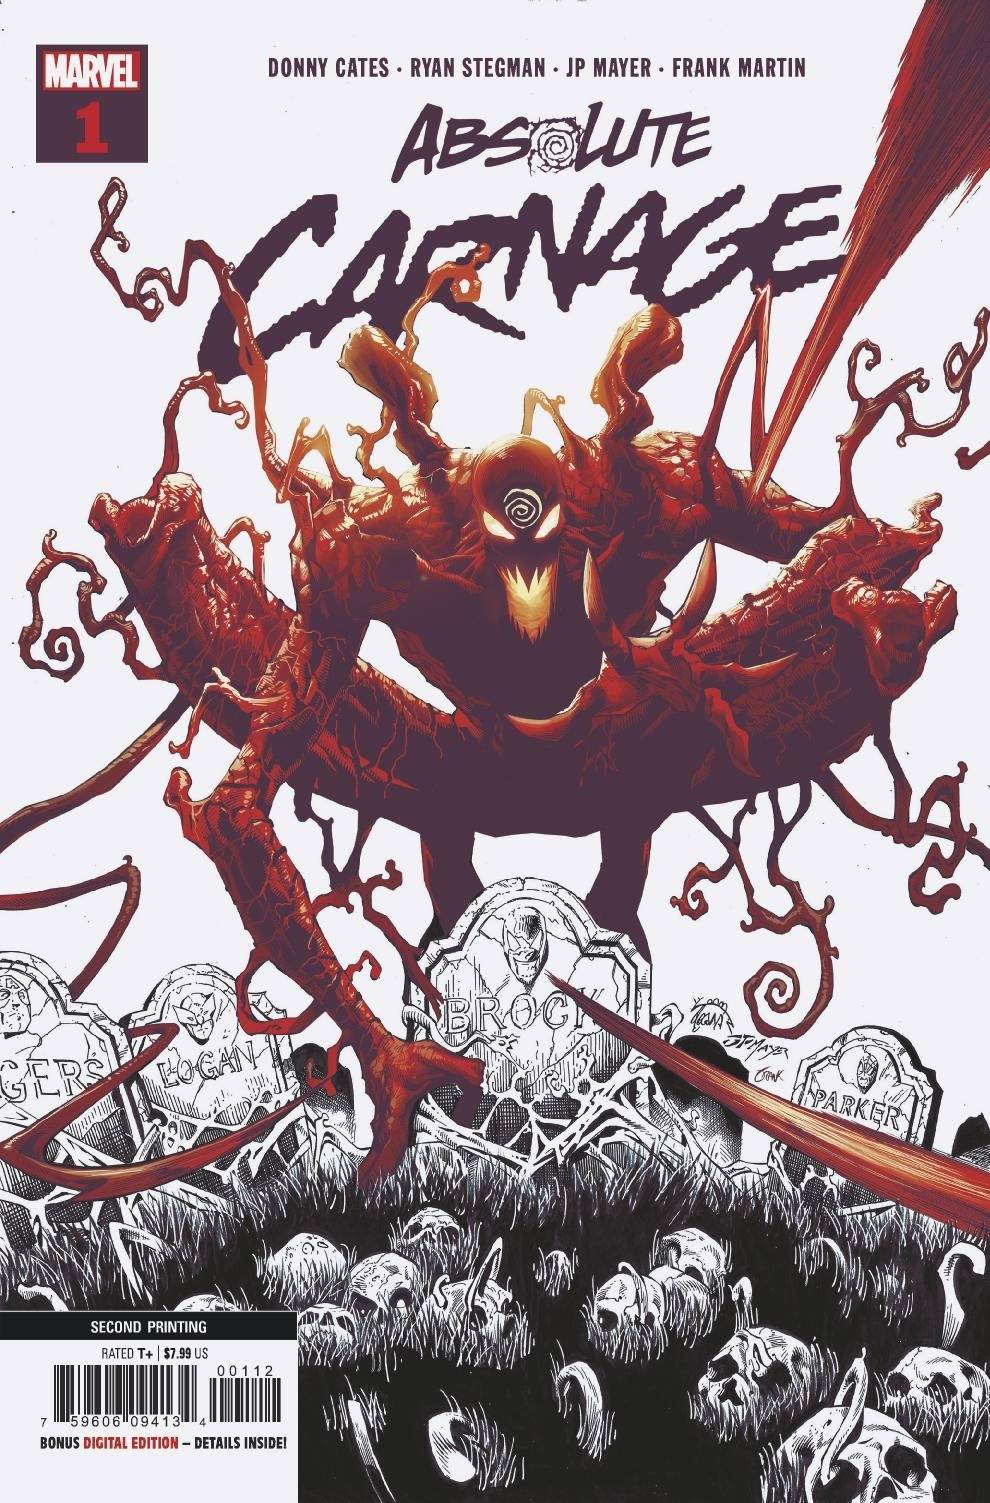 ABSOLUTE CARNAGE #1 (OF 4) 2ND PRINTING